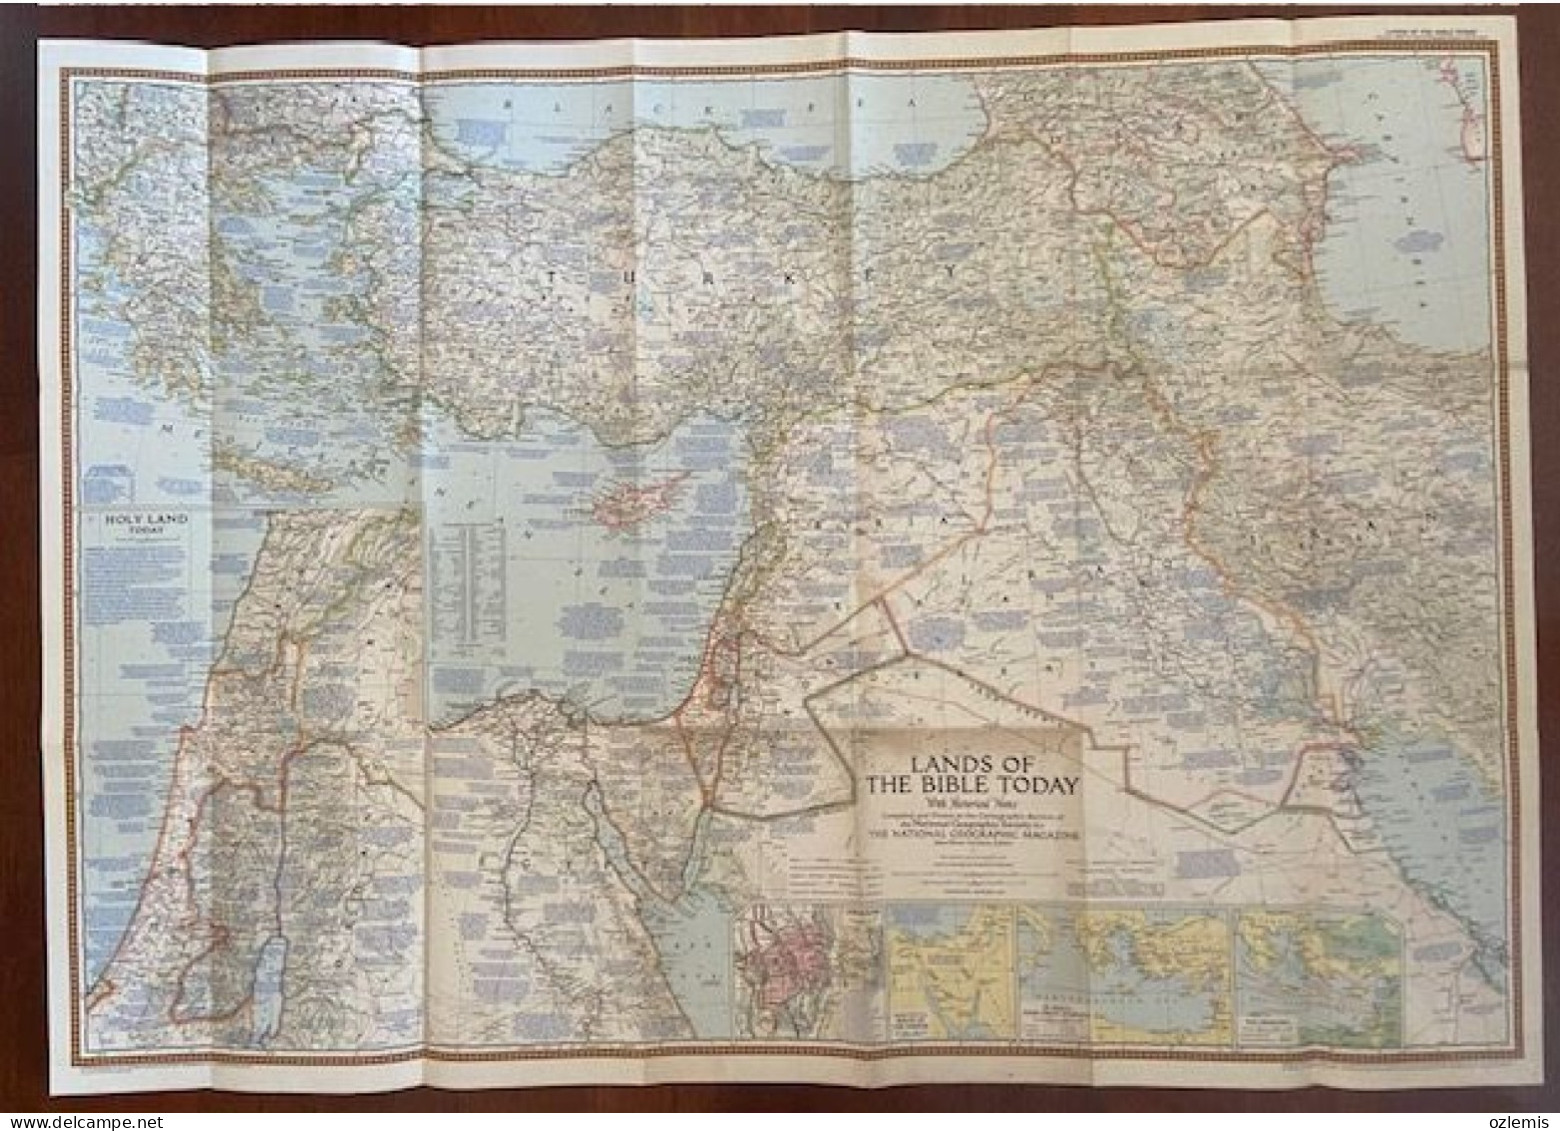 LANDS OF THE BIBLE TODAY WITH HISTORICAL NOTES ,THE NATIONAL GEOGRAPHIC MAGAZINE ,1956 ,MAP - Atlas, Cartes